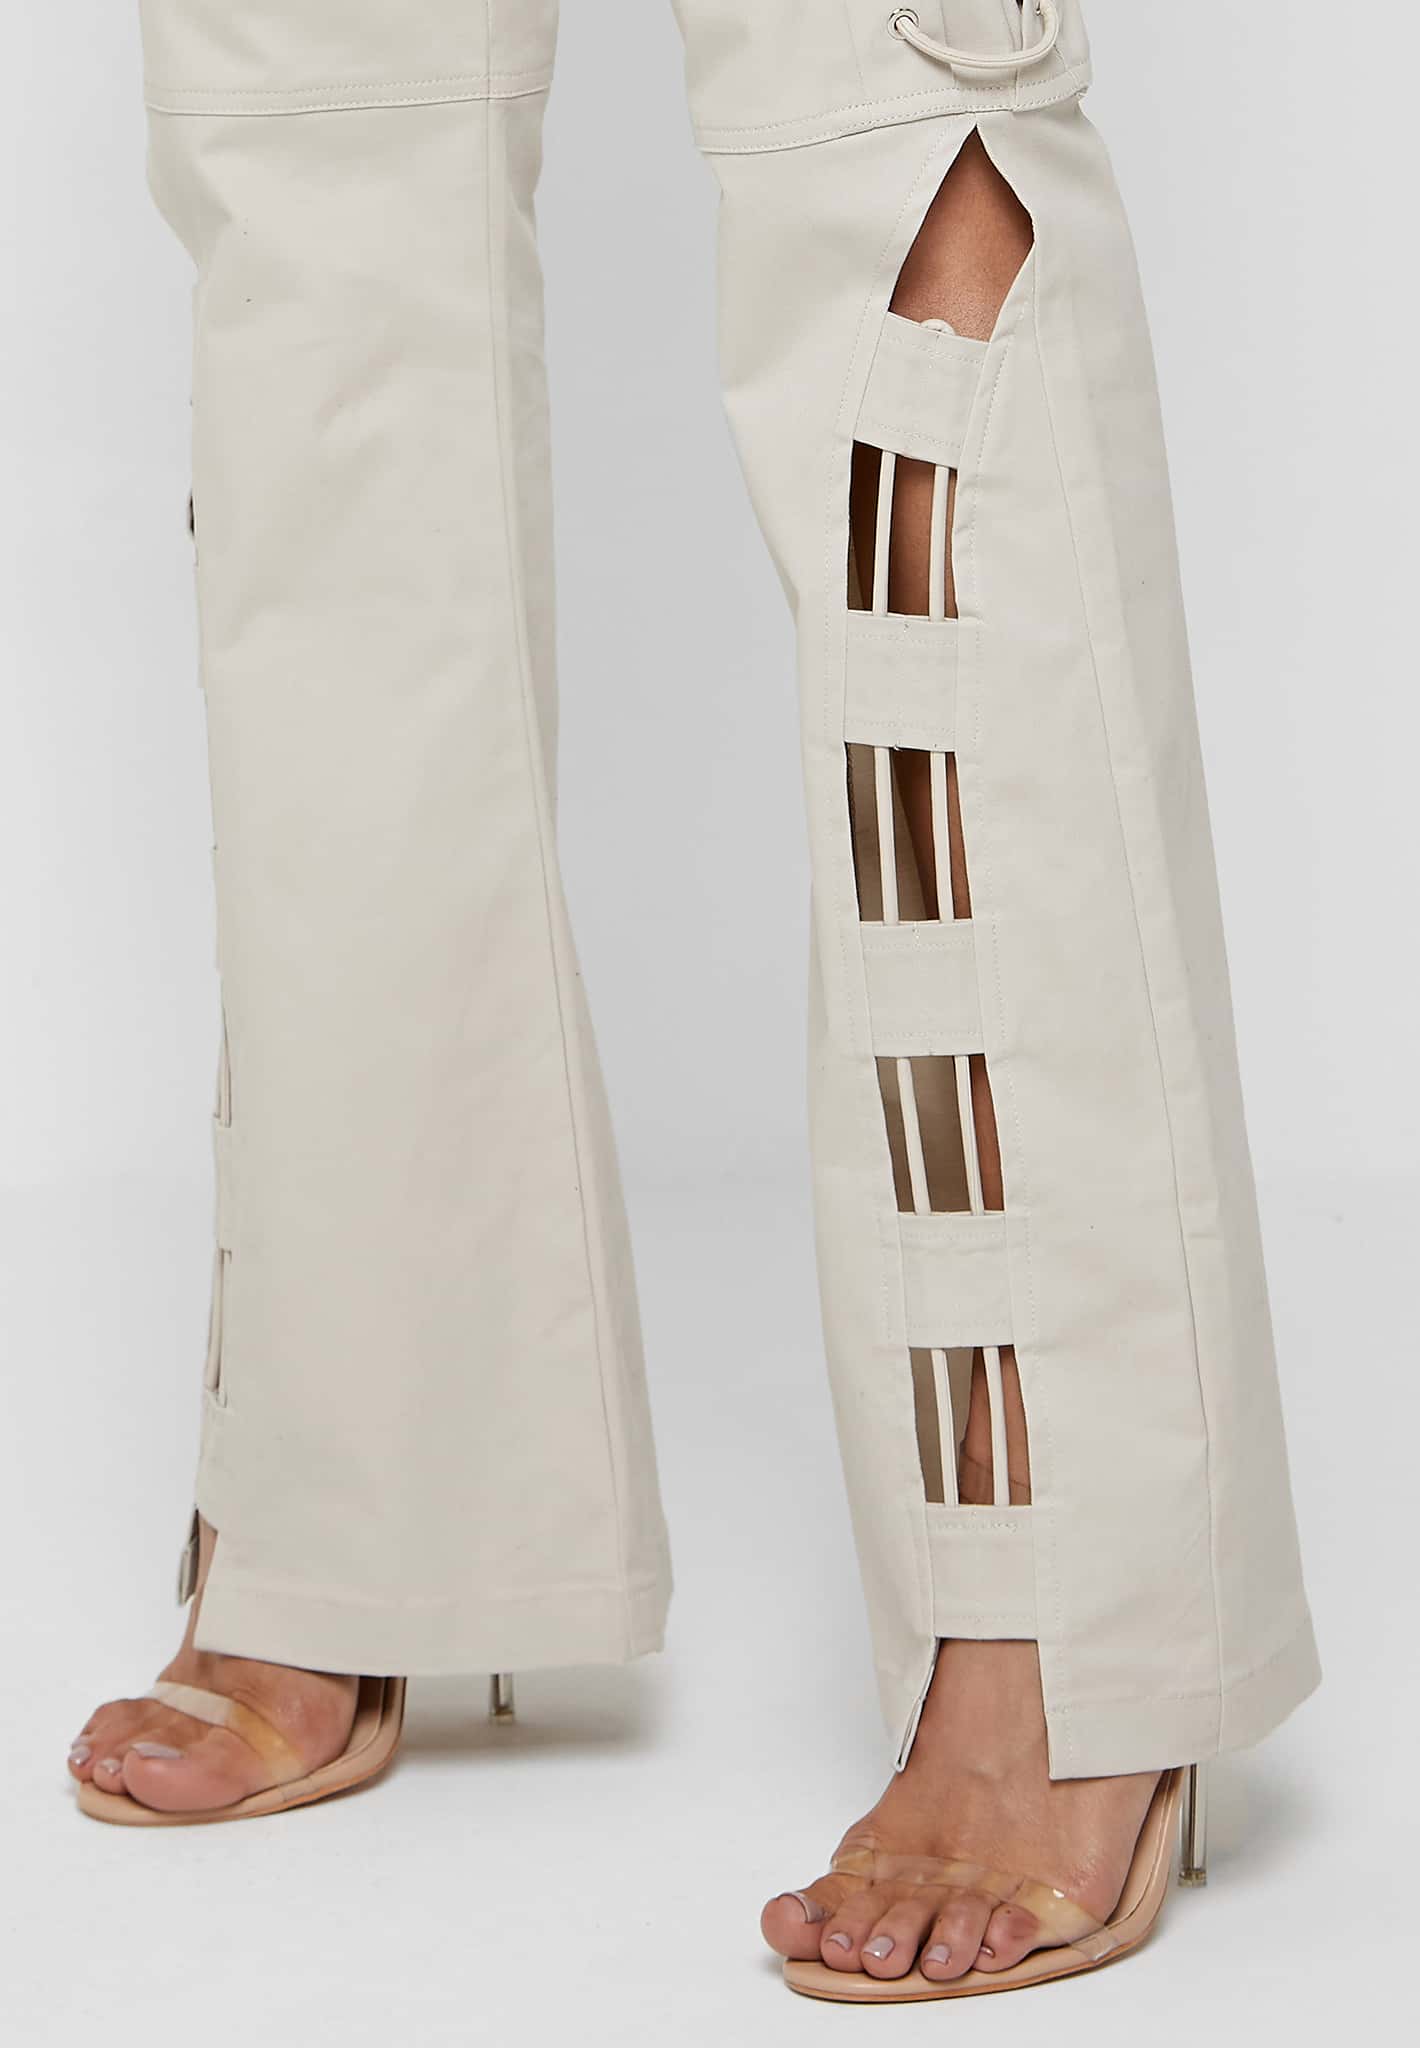 Women's formal trousers beige colour with a smooth pattern 15367